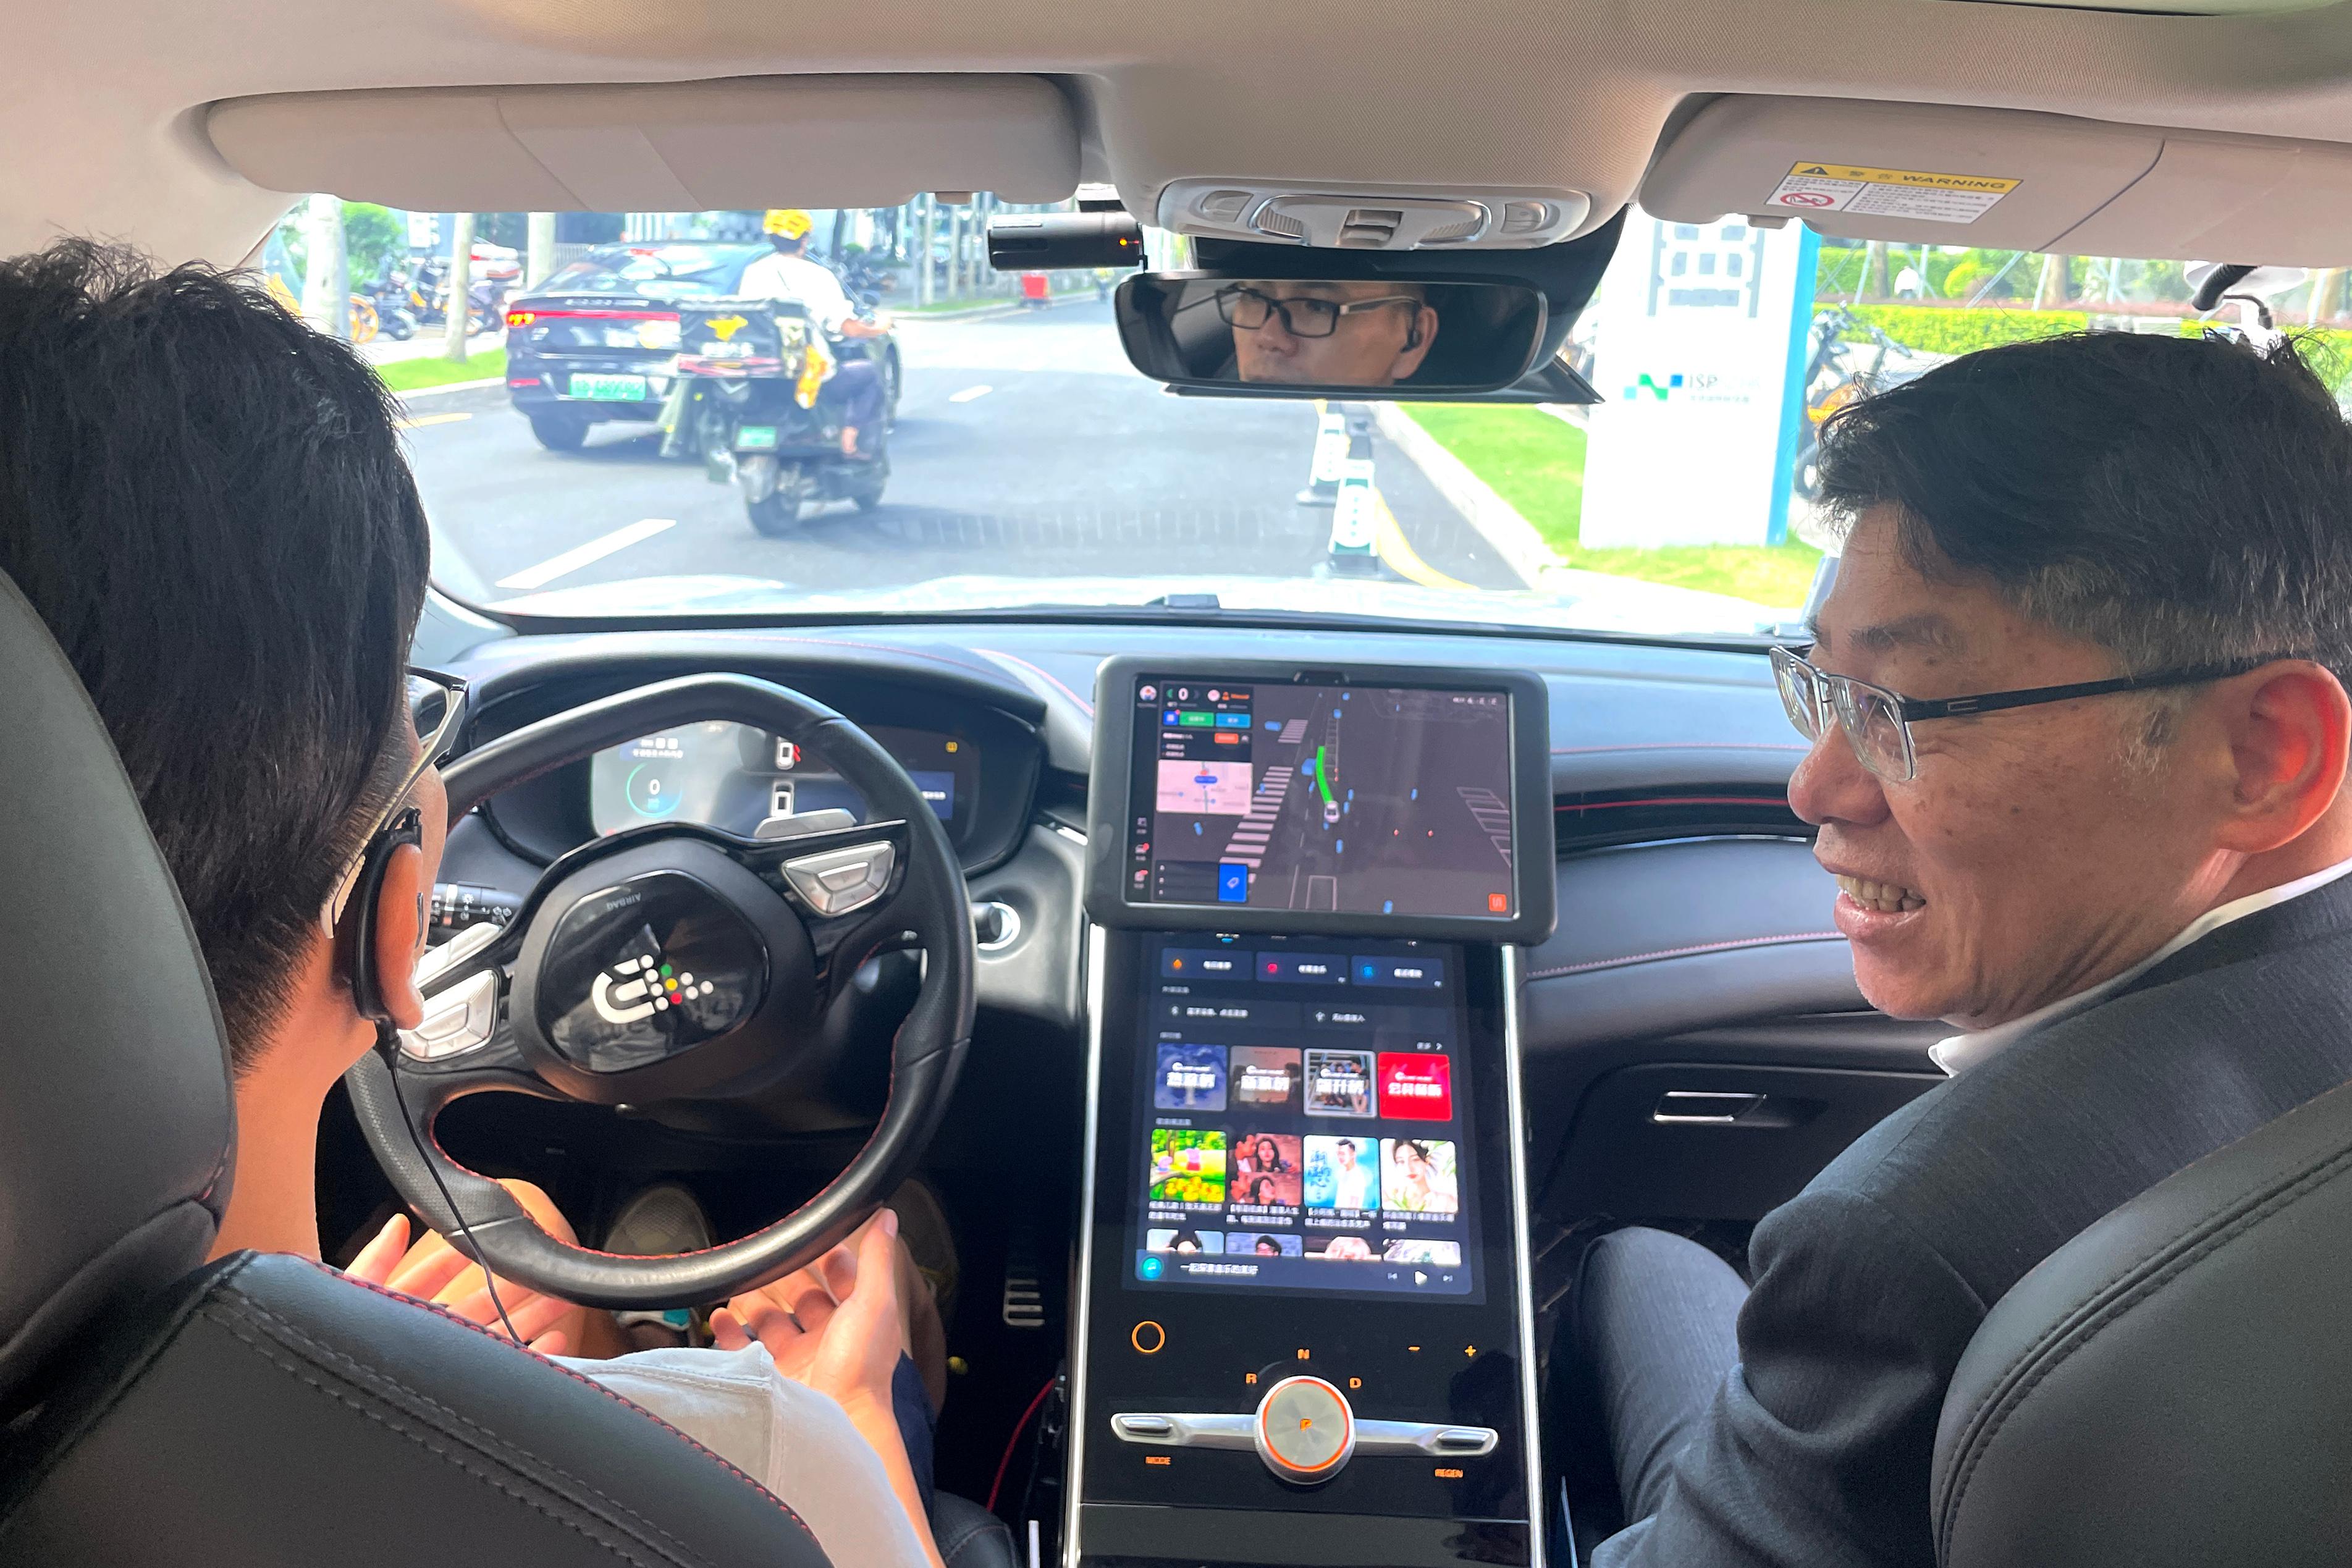 The Secretary for Transport and Logistics, Mr Lam Sai-hung (right), today (July 20) took a test ride in an autonomous vehicle (AV) in Futian to gain a better understanding of the operation and development of AVs in Shenzhen. The person sitting next to him is a safety operator.